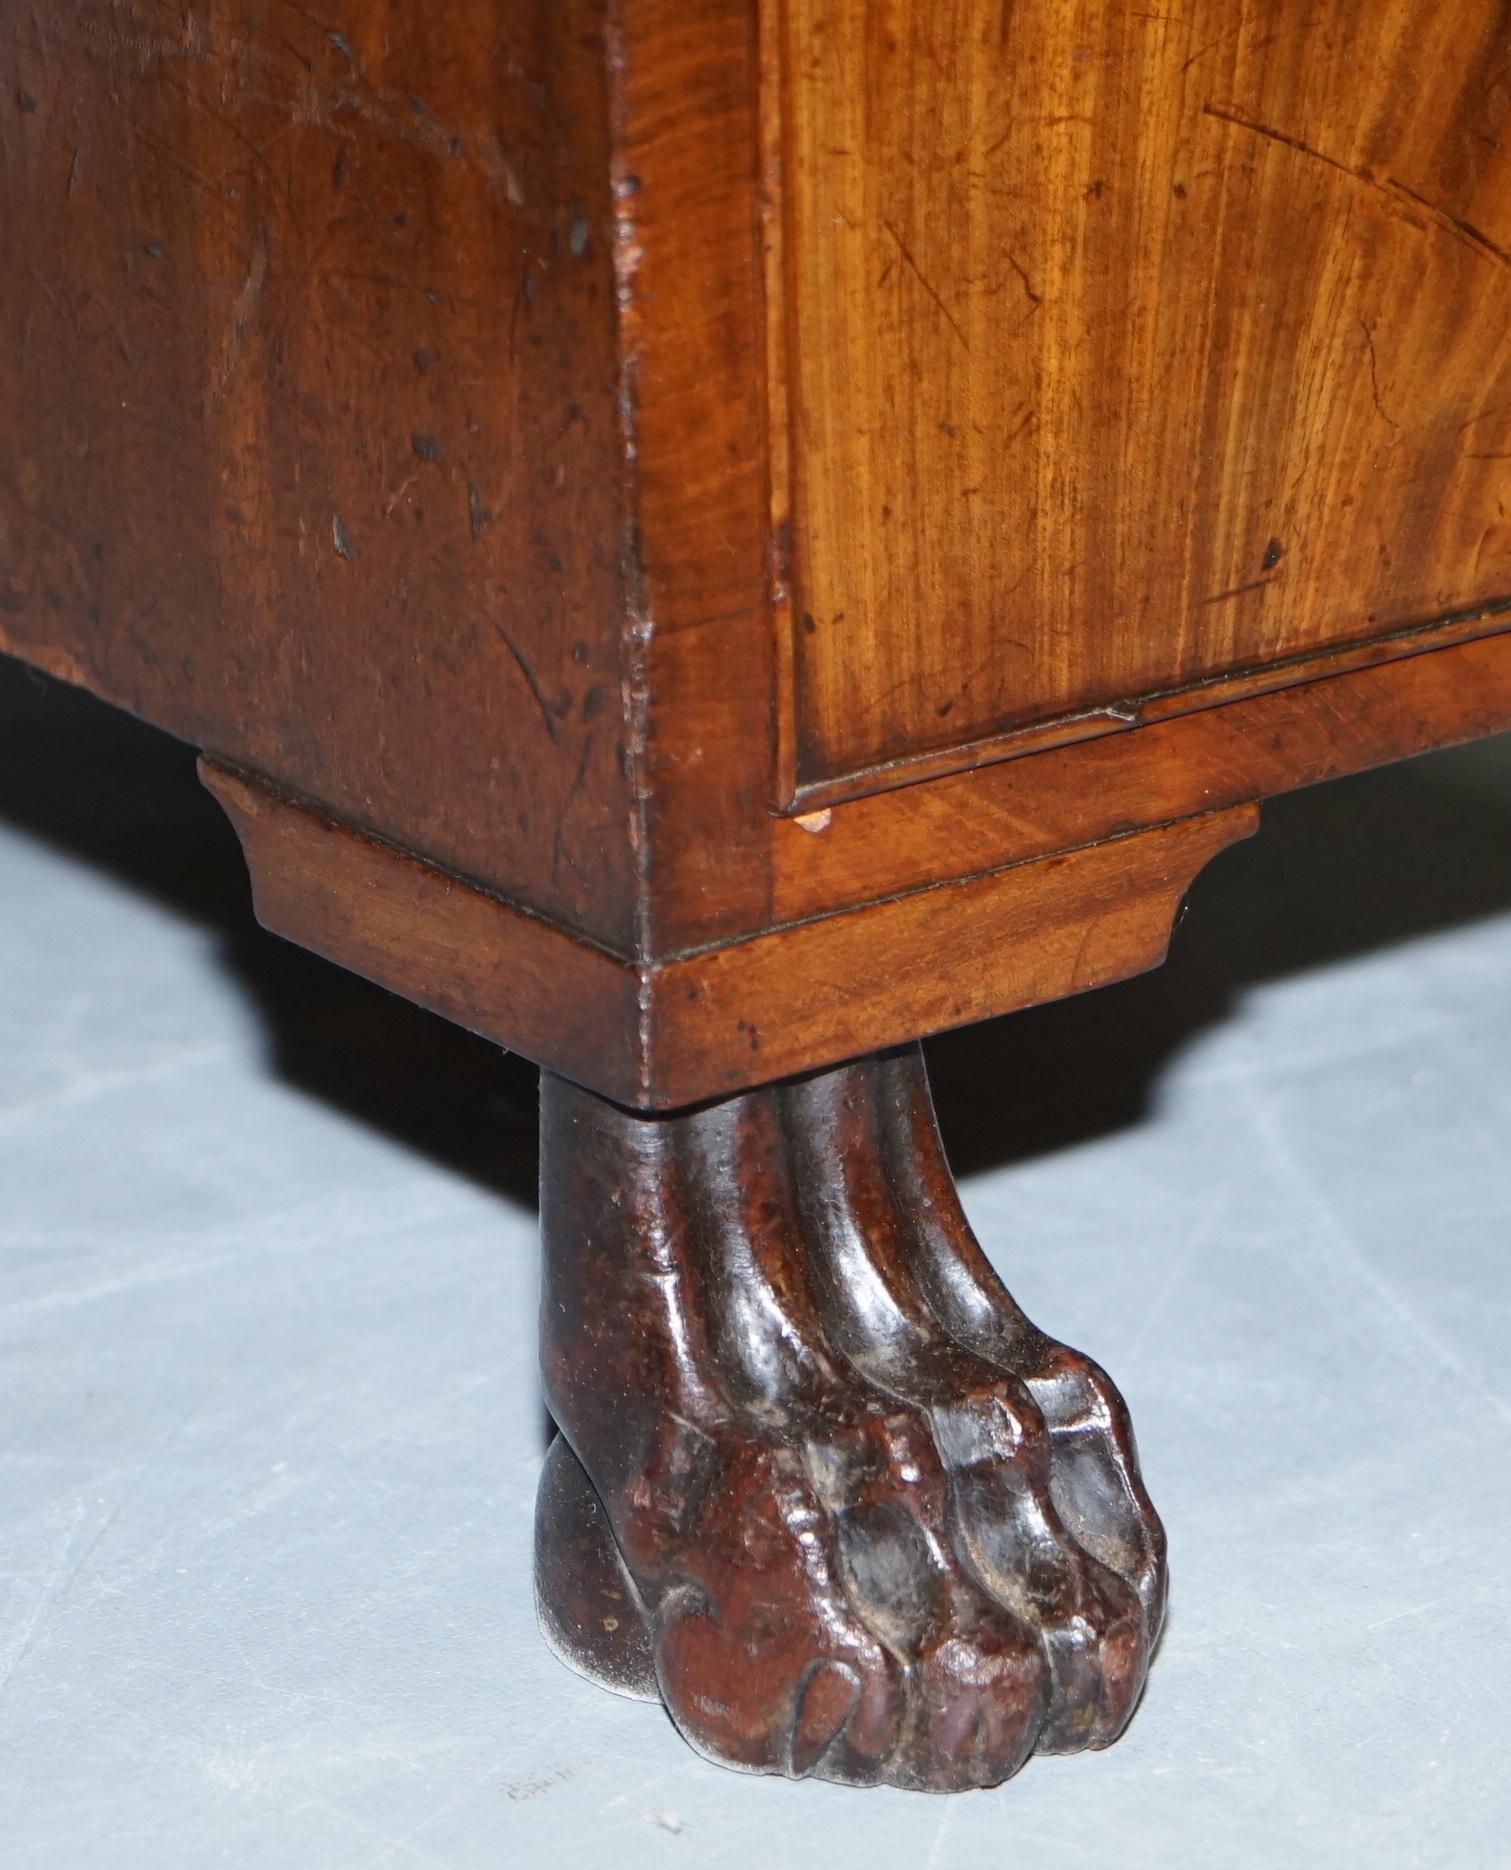 Exquisite Regency Period 1815 Hardwood Kneehole Desk with Lion Hairy Paw Feet For Sale 2